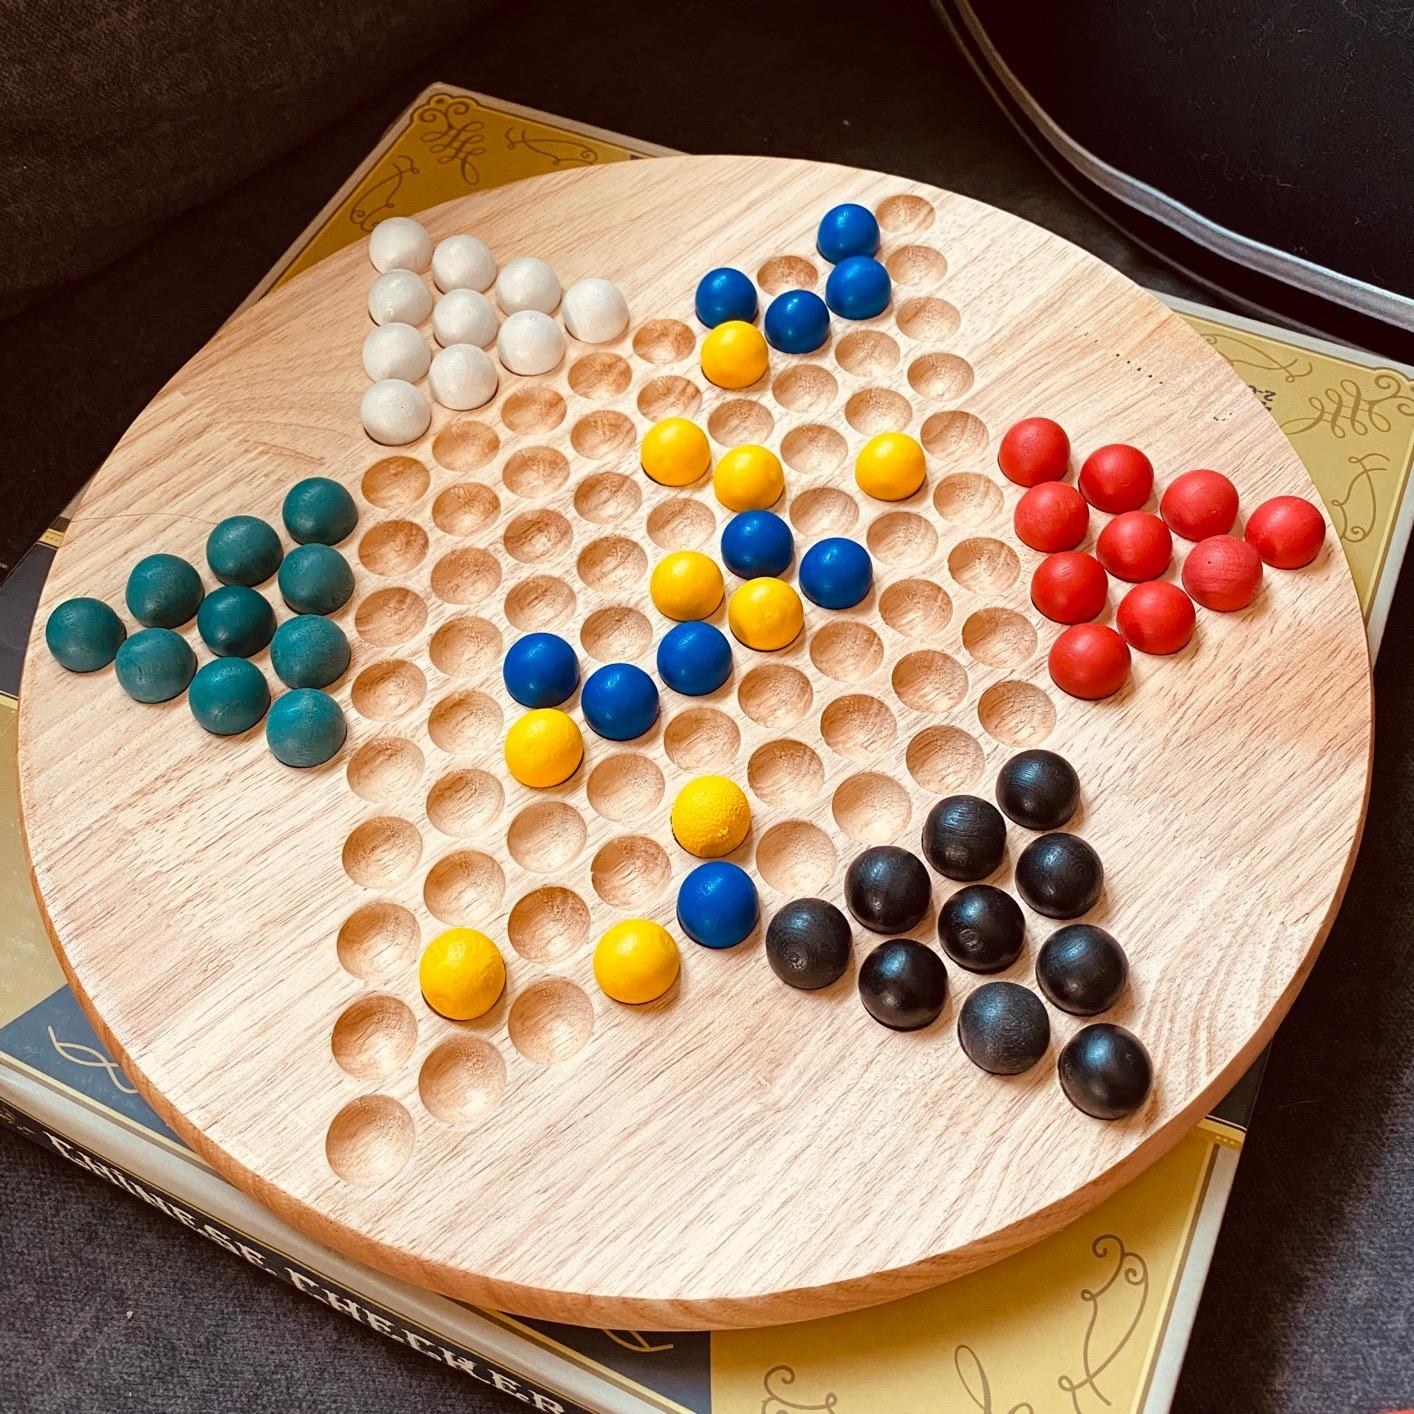 The game board